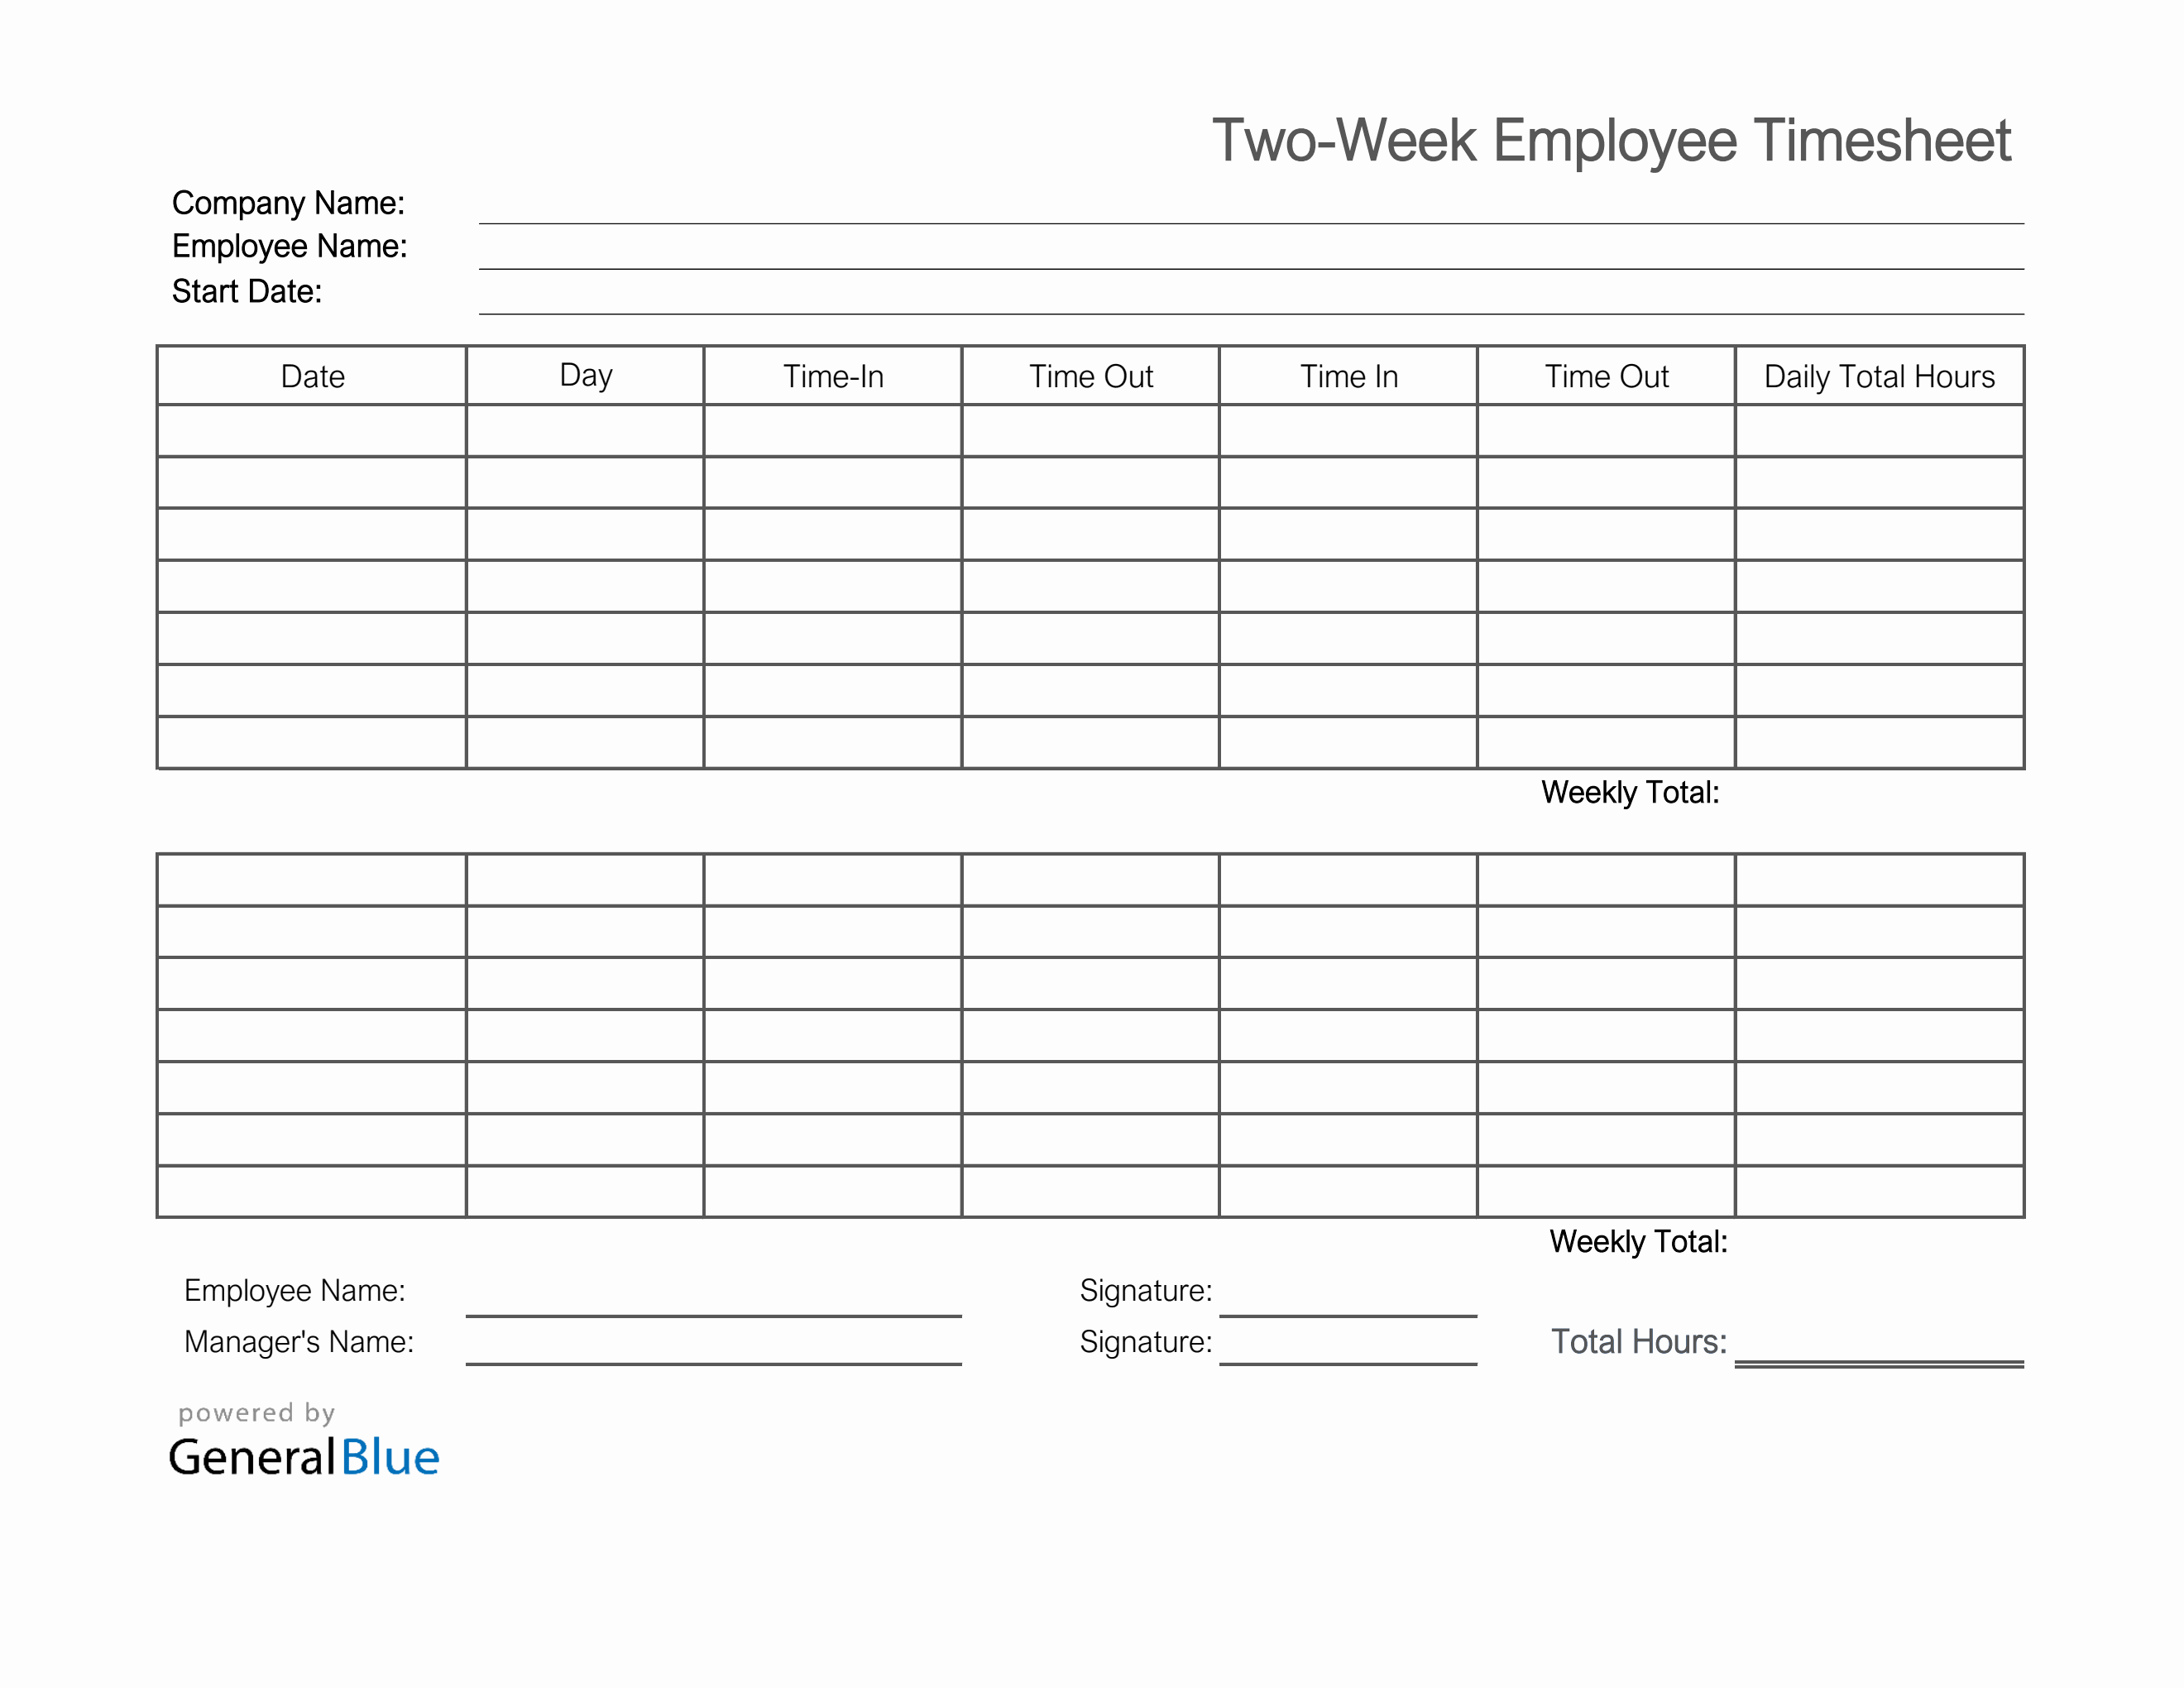 job-time-sheet-template-double-entry-bookkeeping-pin-on-office-stuff